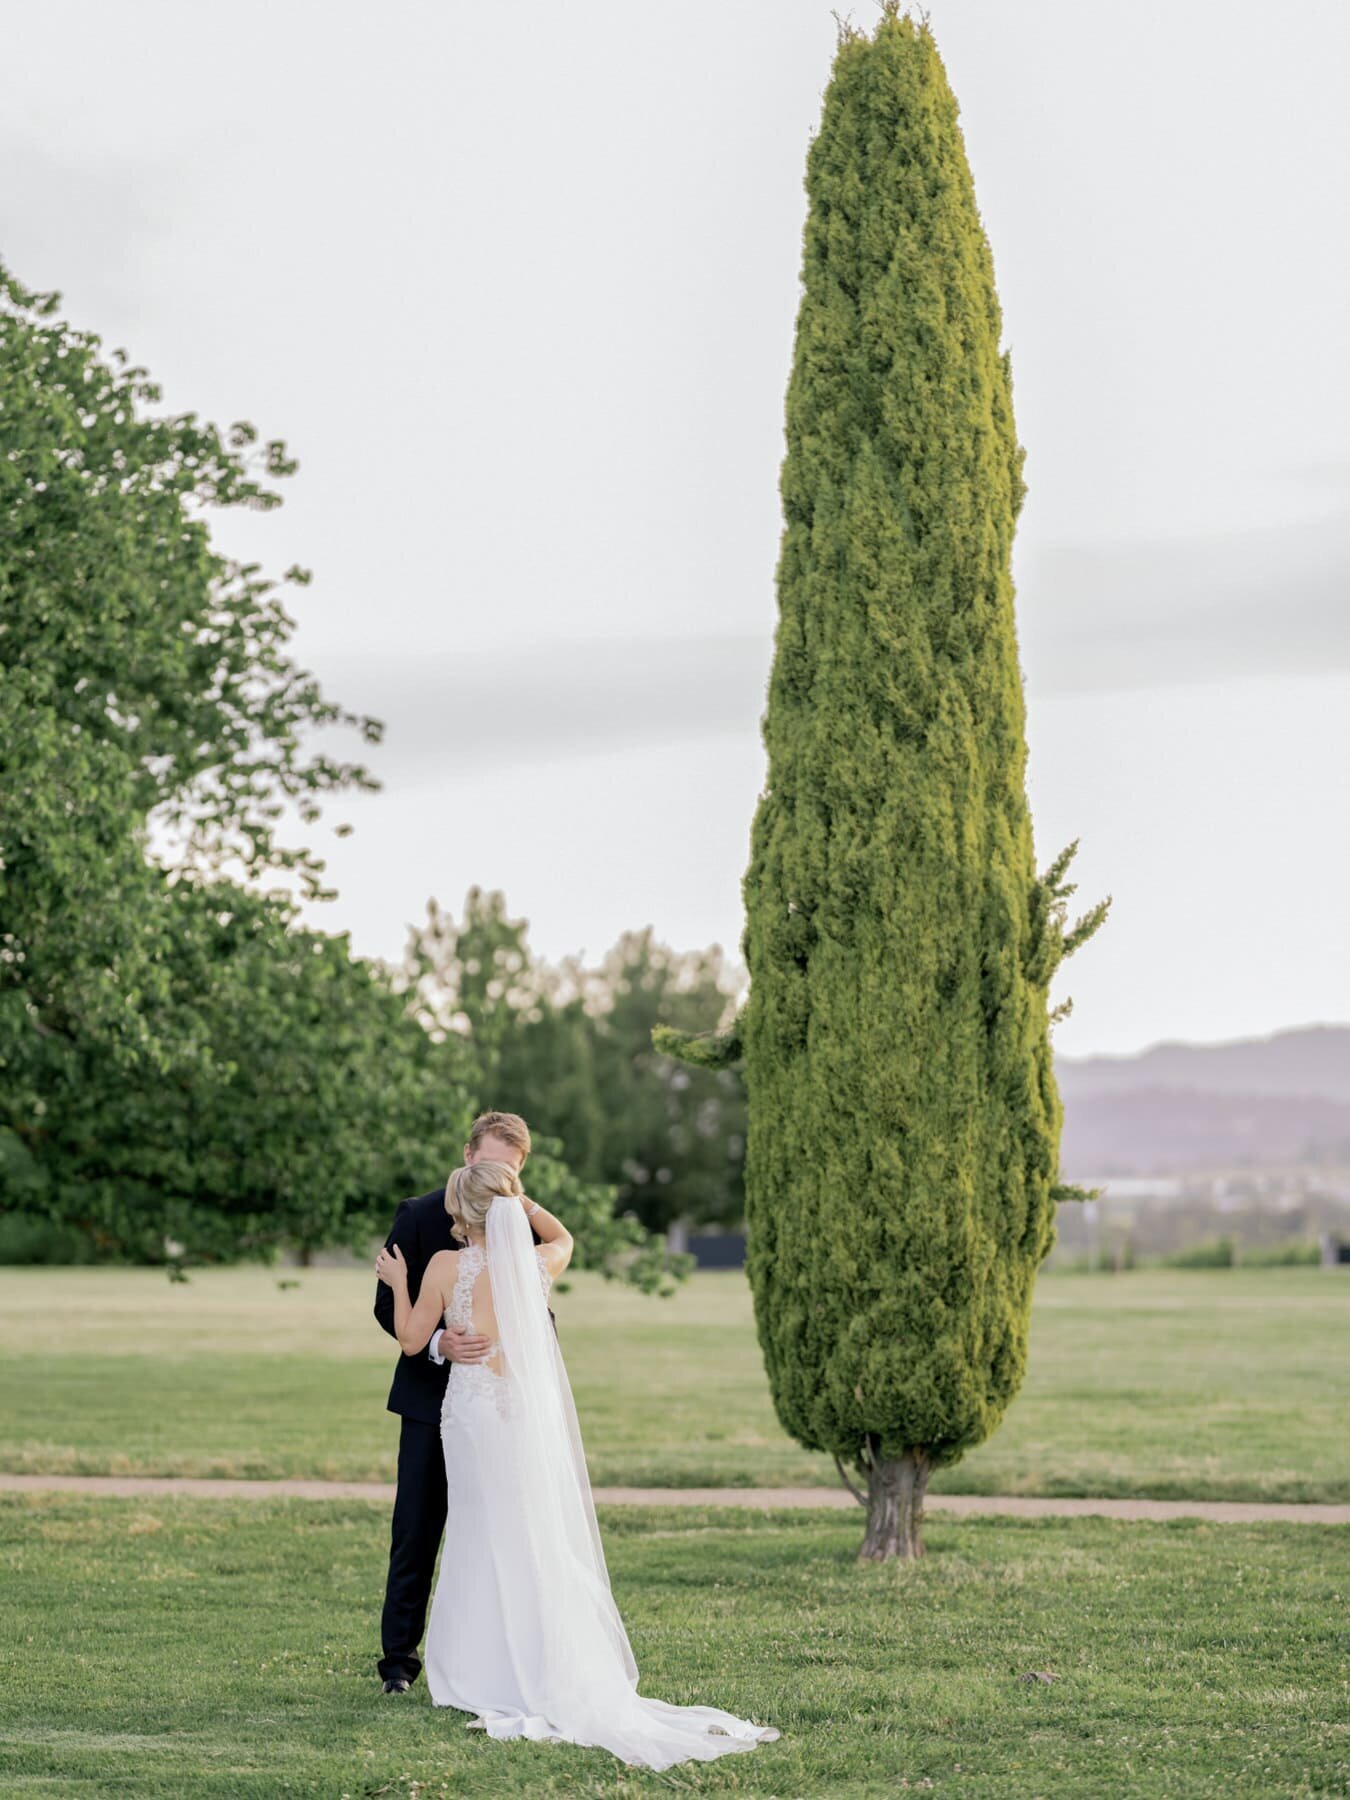 Stones of the Yarra Valley wedding - Serenity Photography 93